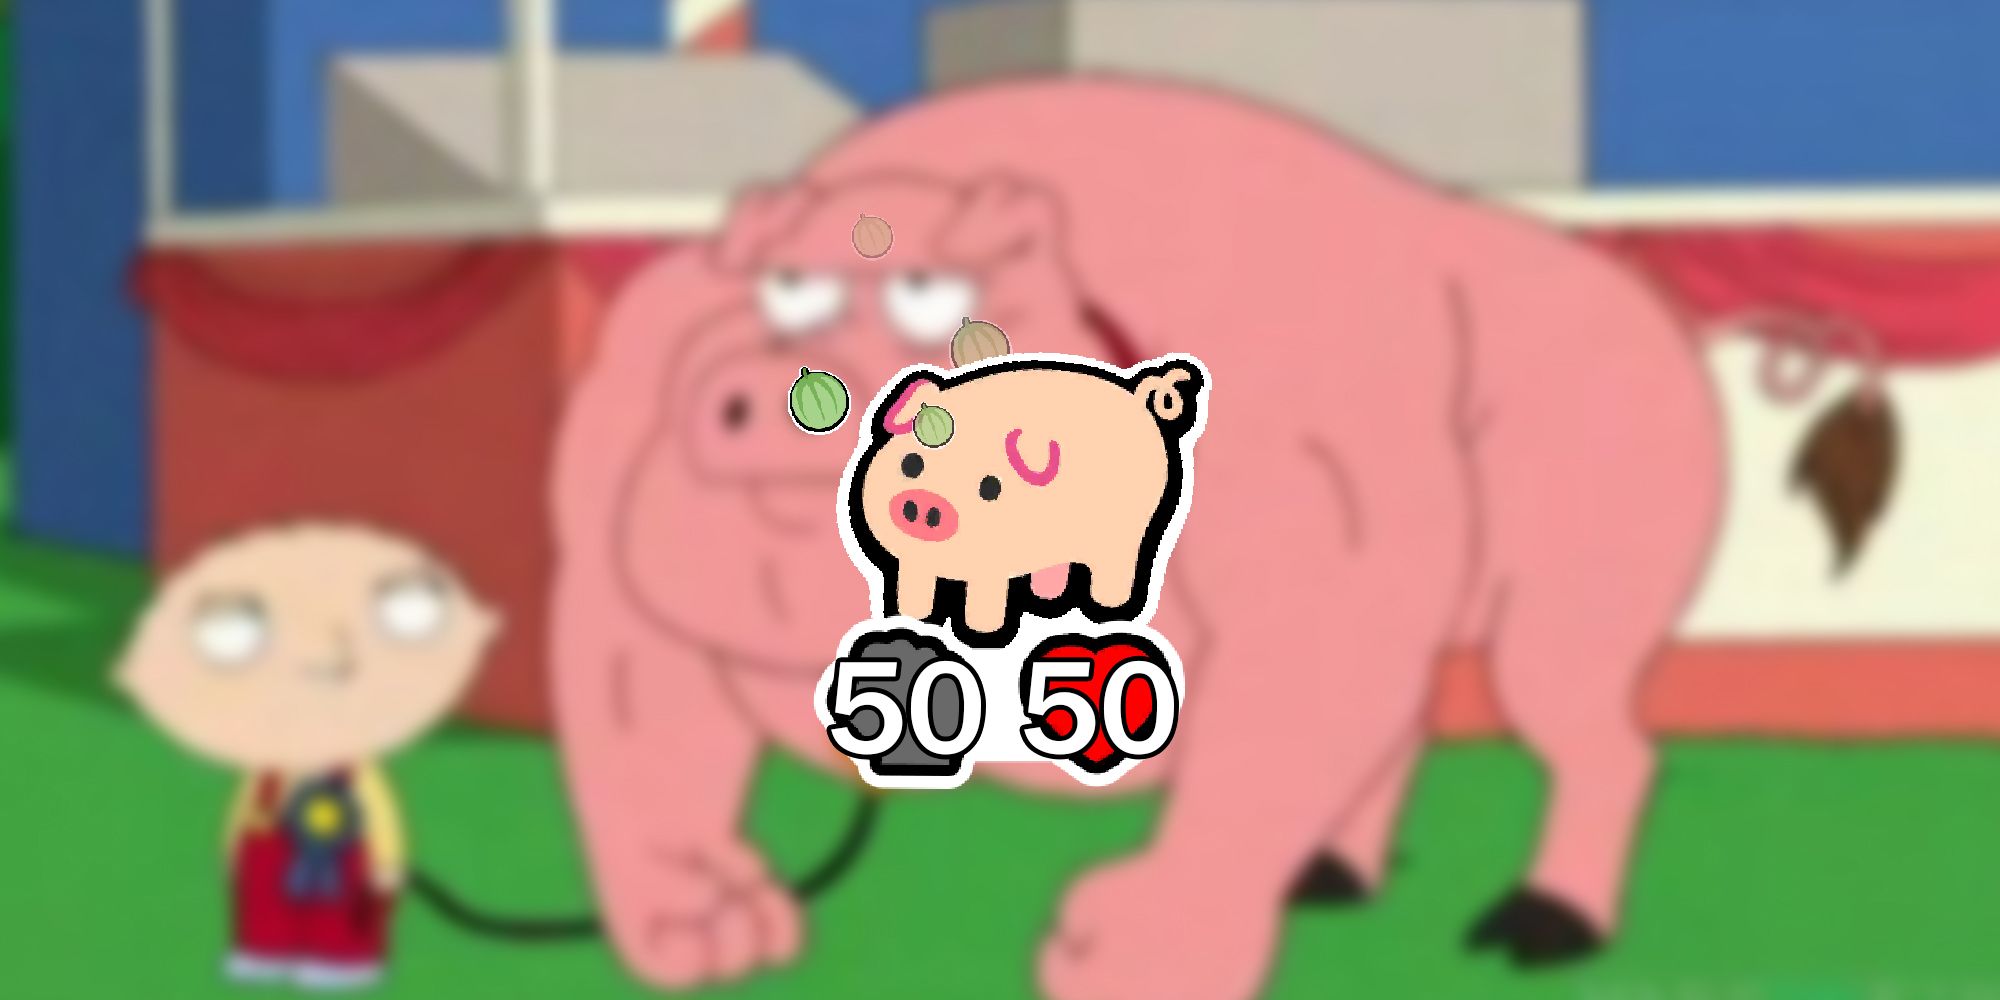 Super Auto Pets - PNG Of 50 HP 50 Pow Pig Pet Overlaid On Image Of Buff Pig From Family Guy